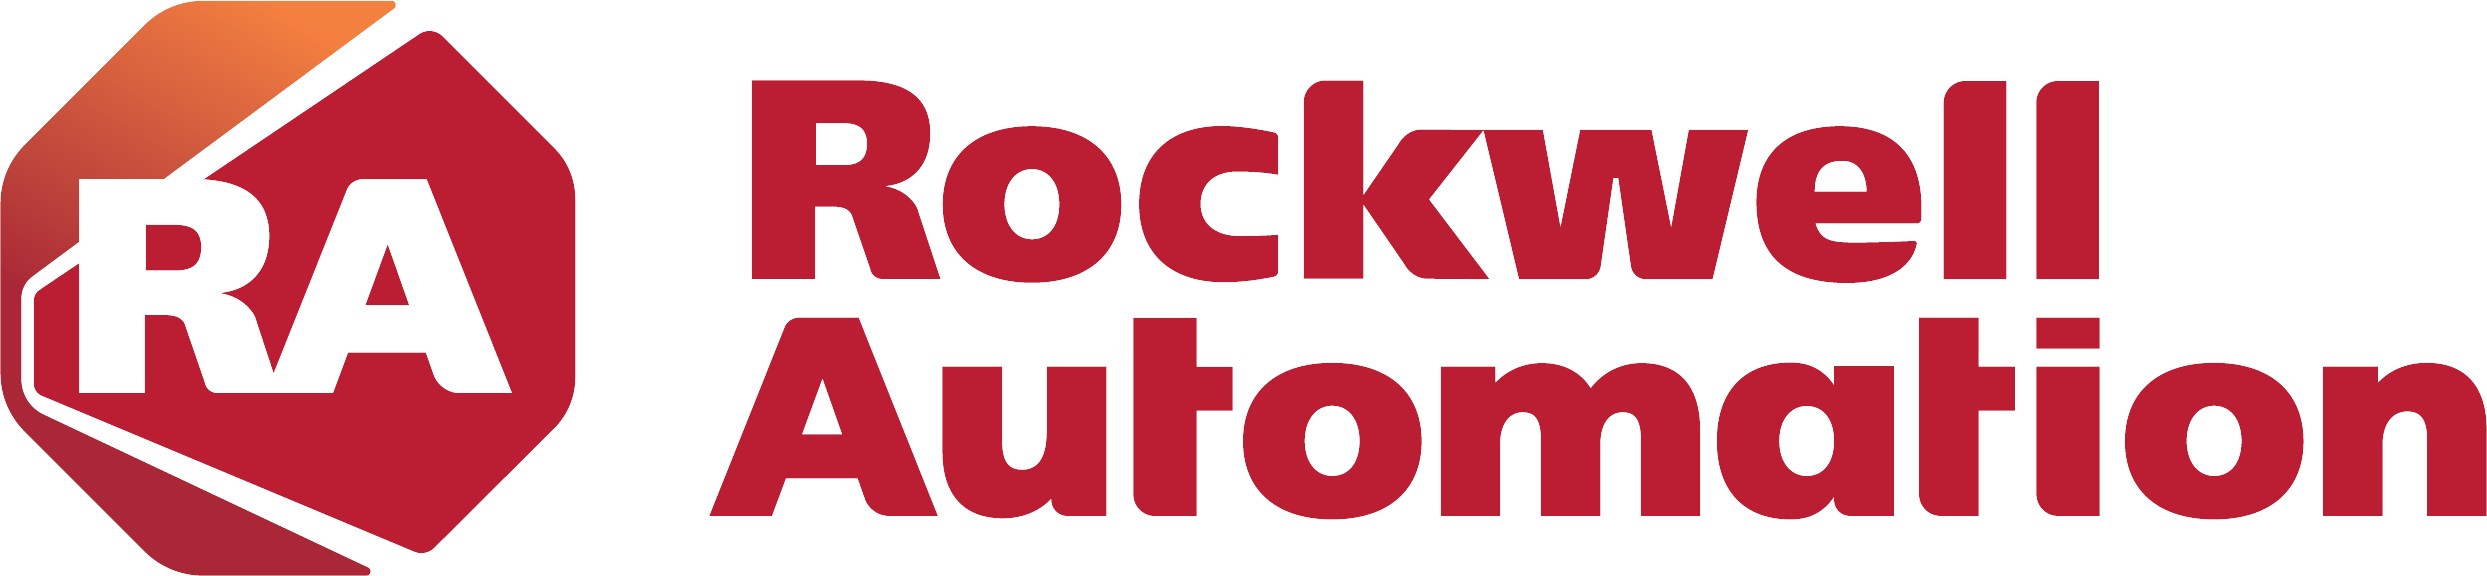 Rockwell Automation offers intership and co-op opportunities.